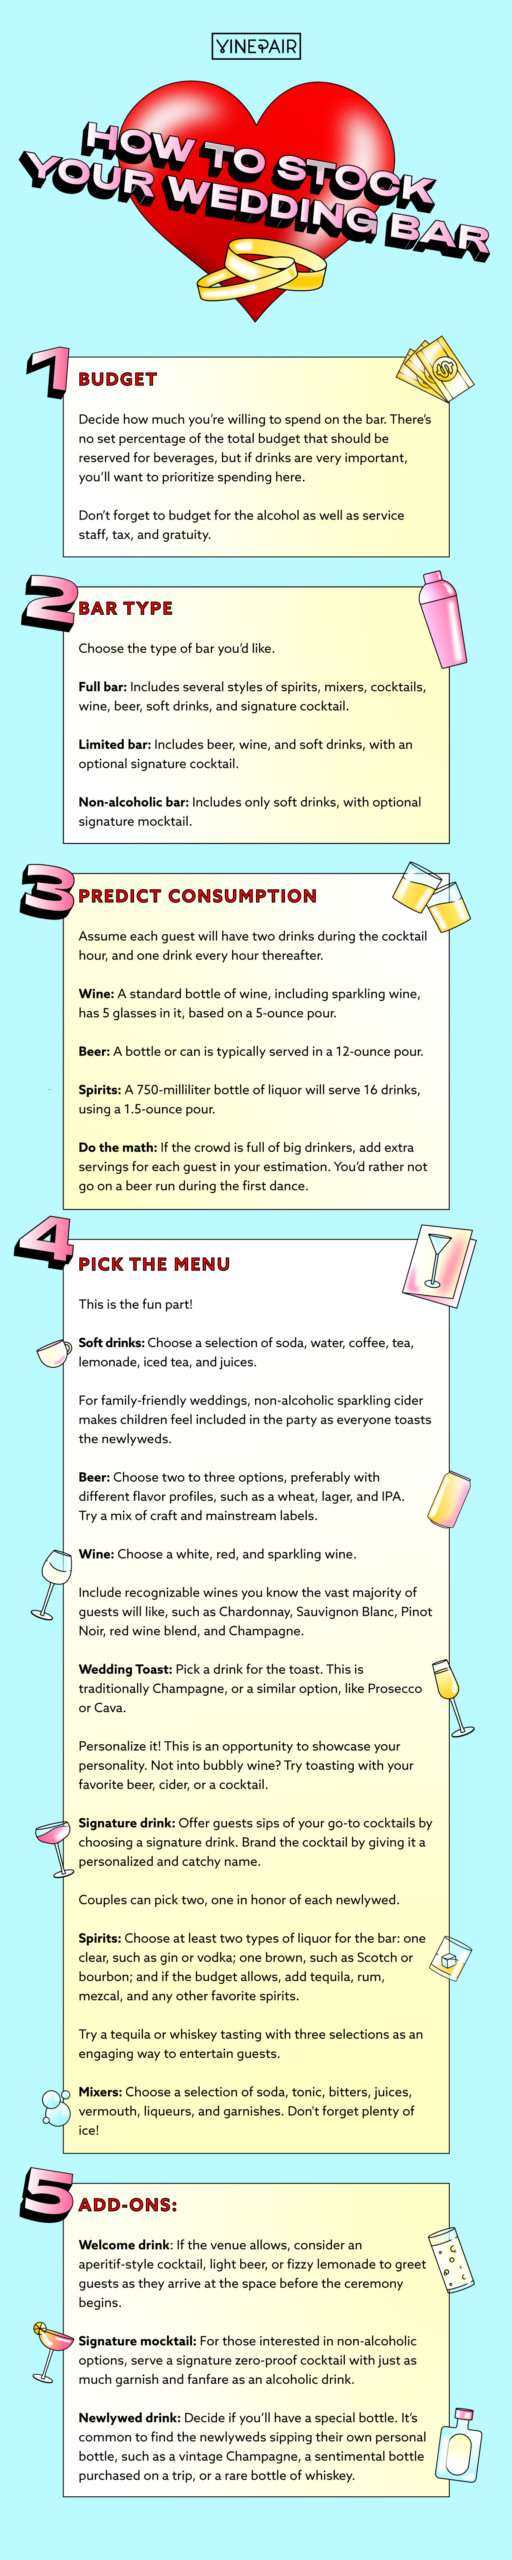 Here's how to stock your wedding bar